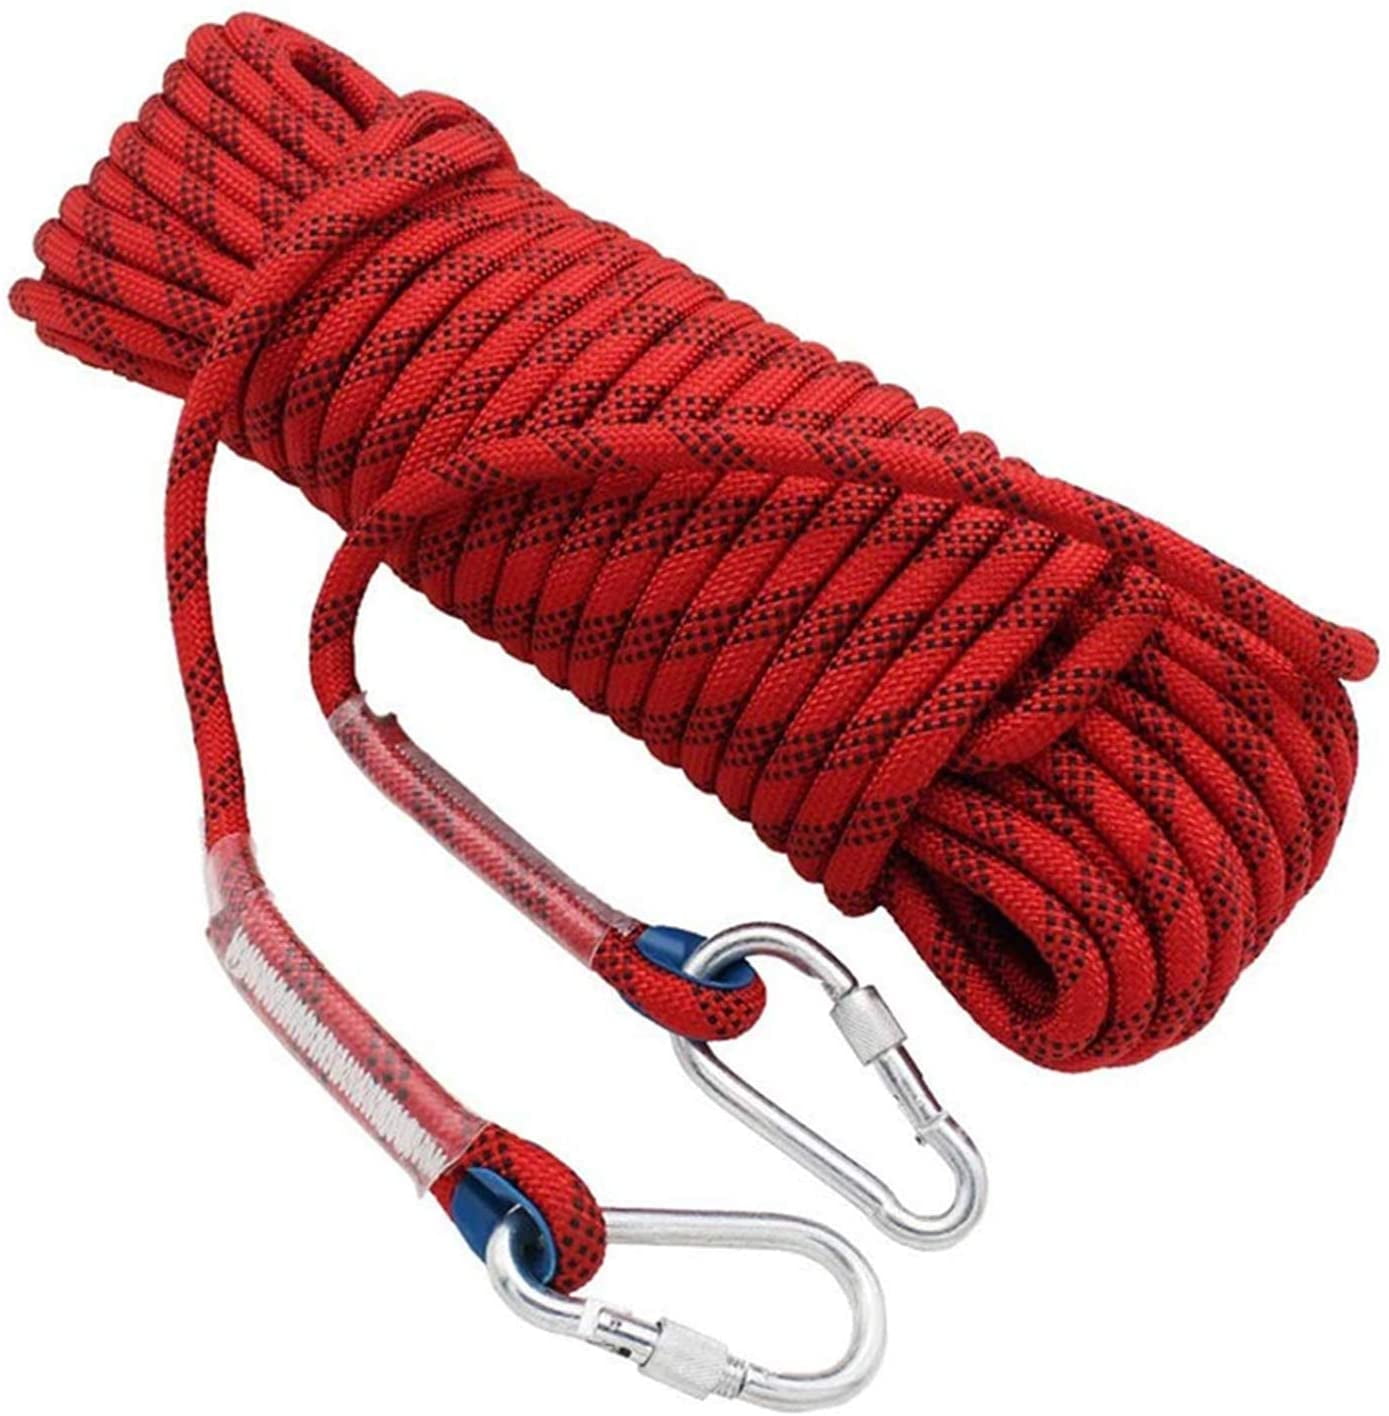 Joyzan Rope Lock, Rope Grab Heavy Duty Outdoor Mountaineering Fall  Protection Gear Climbing Rappelling Equip for Construction Climbing